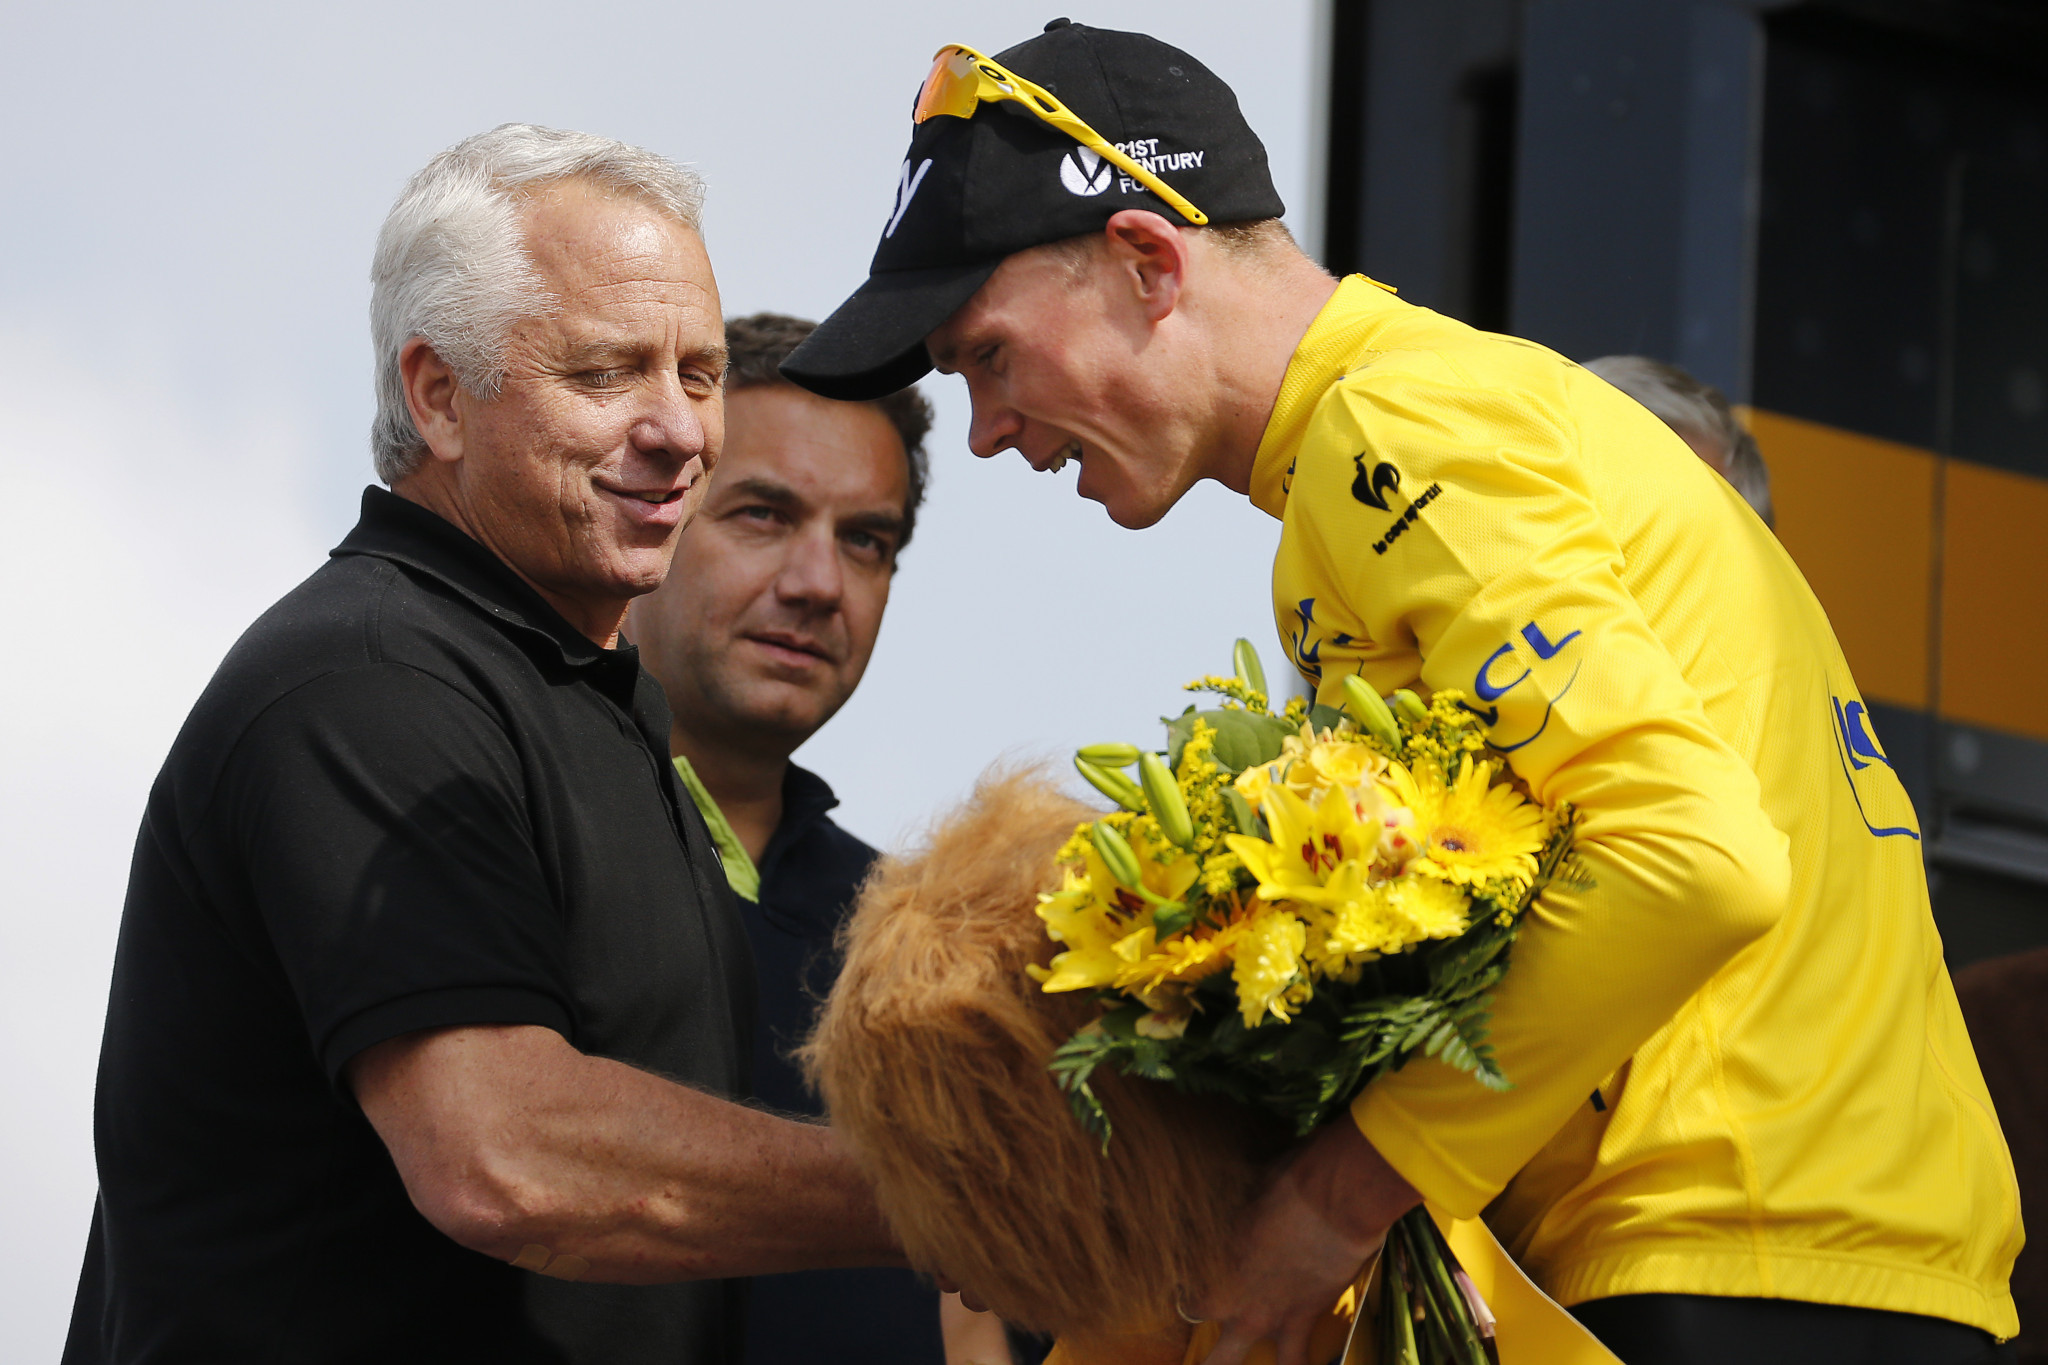 LeMond questions Froome excuse for positive test and claims Briton should be punished